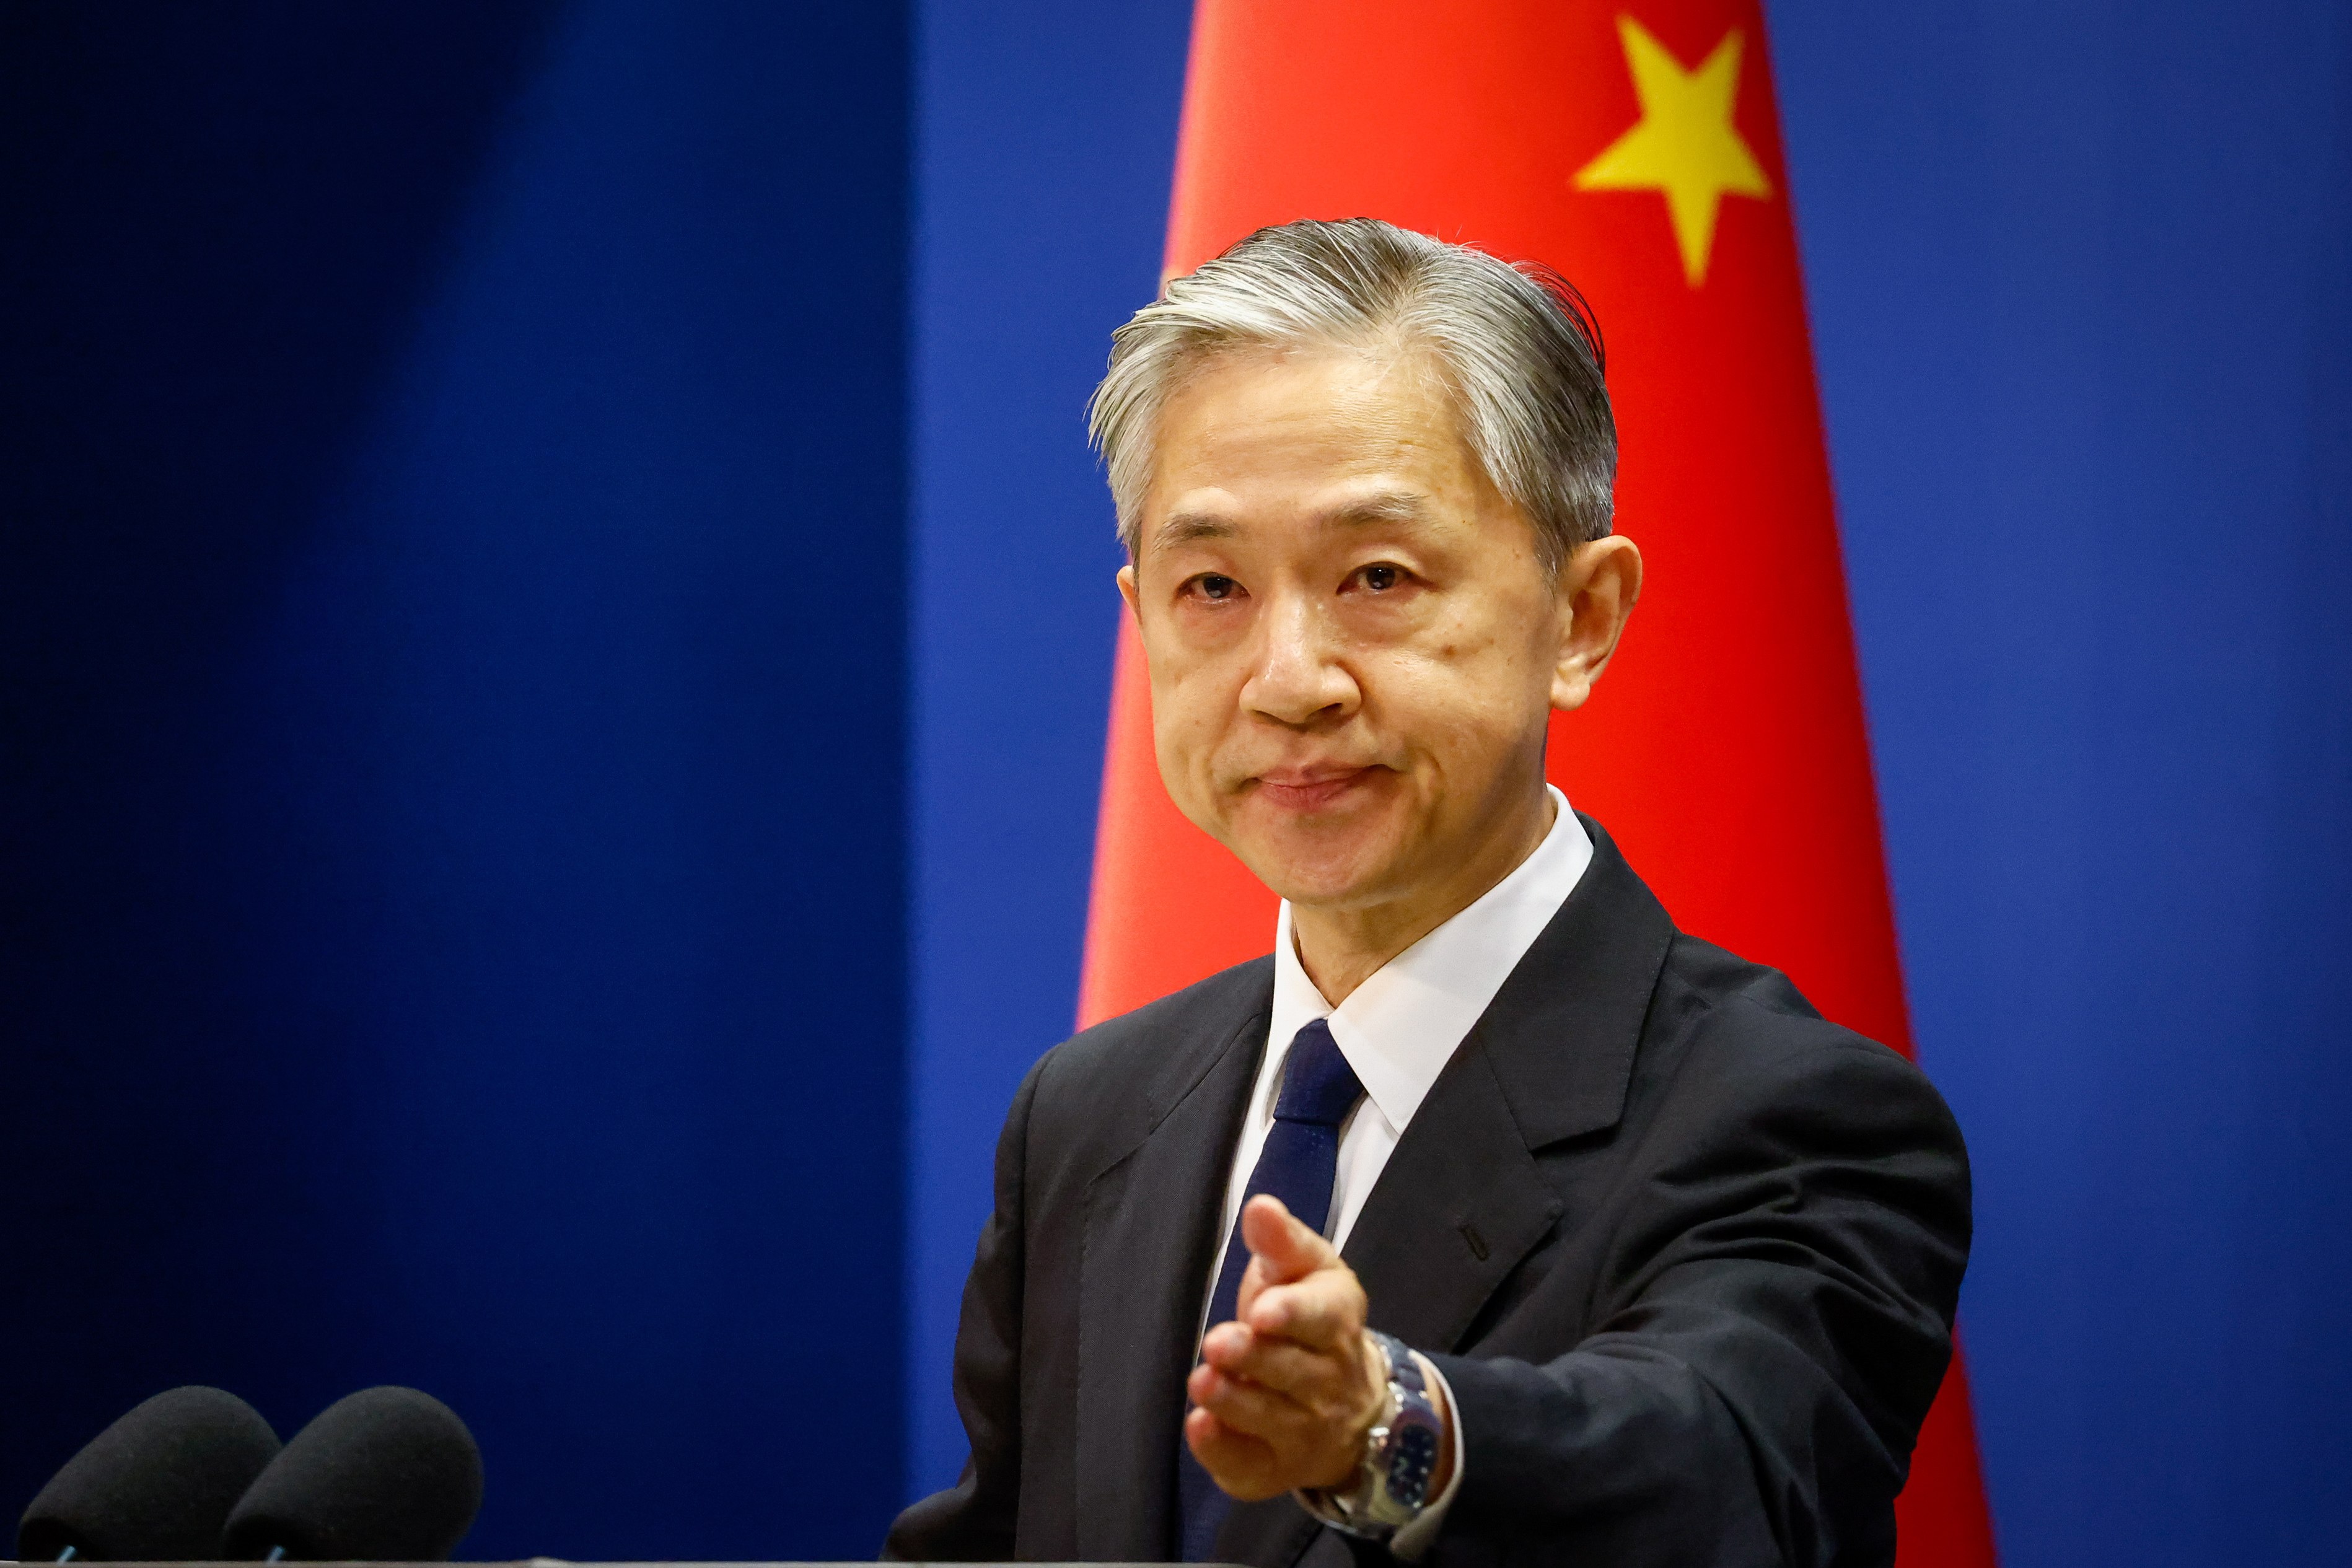 Chinese foreign ministry spokesman Wang Wenbin said one Indian reporter is still living and working in China, amid an ongoing visa dispute between the two countries. Photo: EPA-EFE